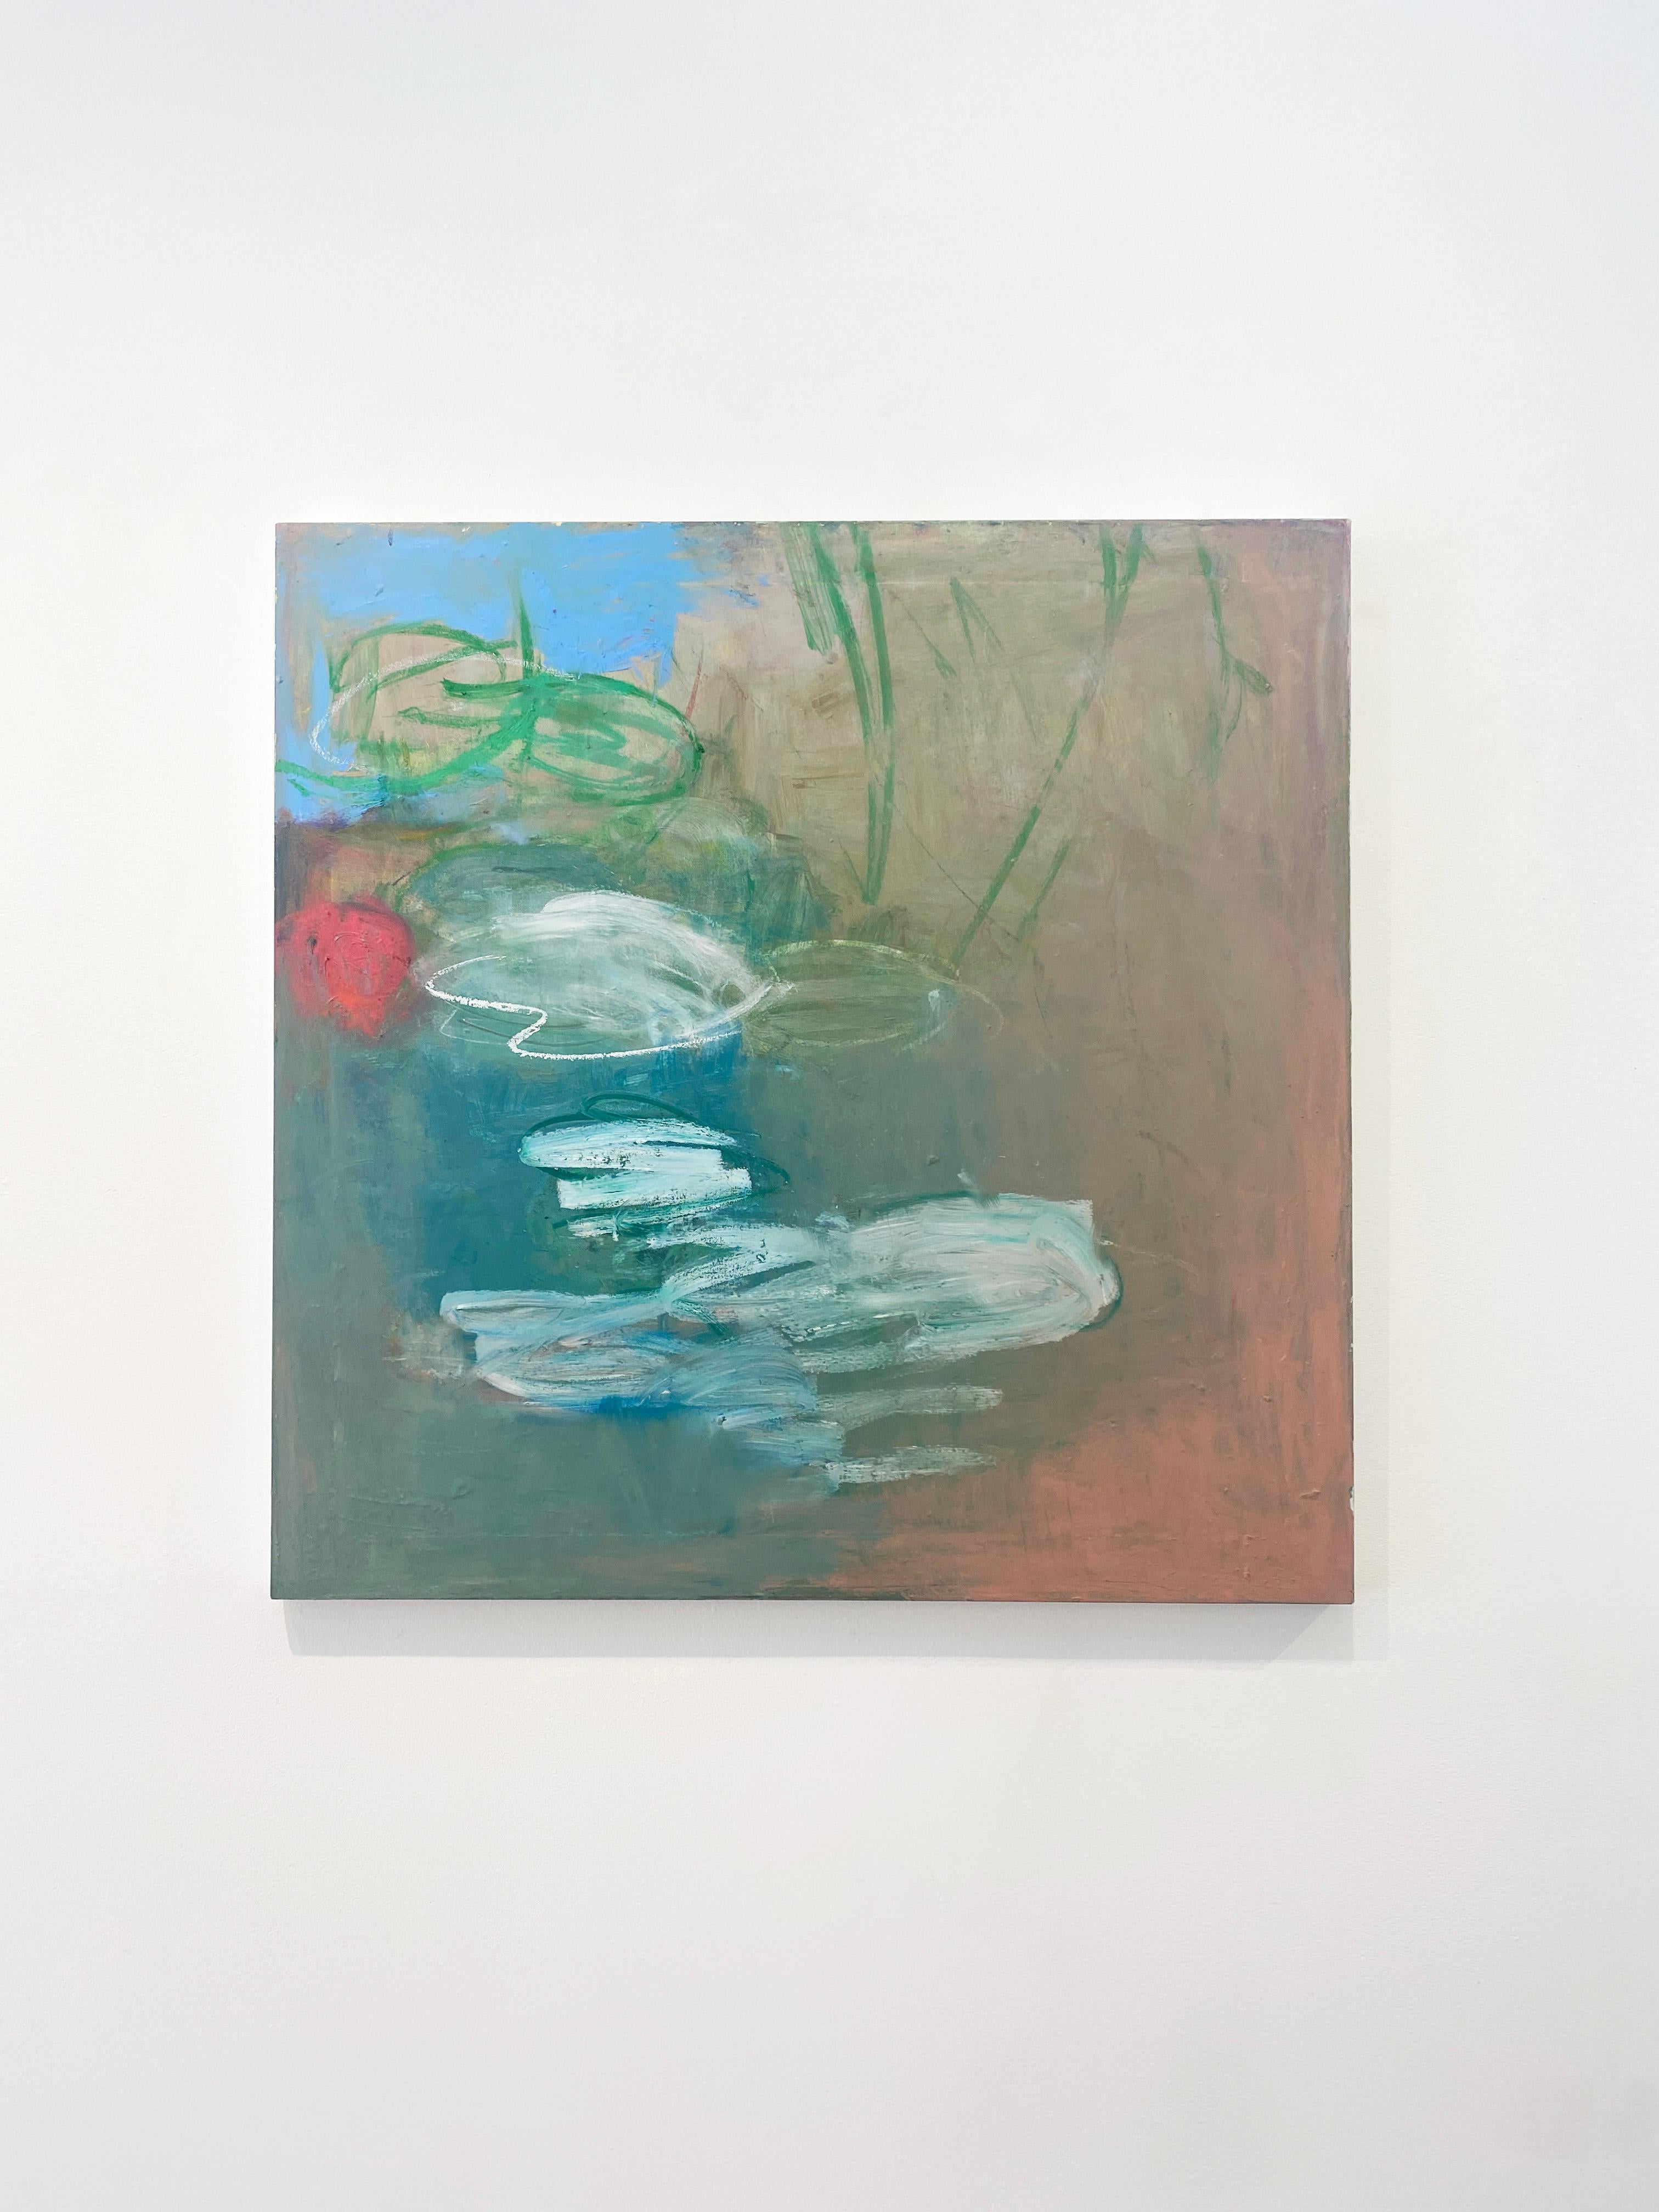 'Untitled 40' by New York City based, French artist Sandrine Kern. 2022. Oil and cold wax on canvas, 40 x 40 in. This abstracted landscape painting features a pond and a water lily scene in colors of blue, green, white, pink, and hot pink.

Sandrine